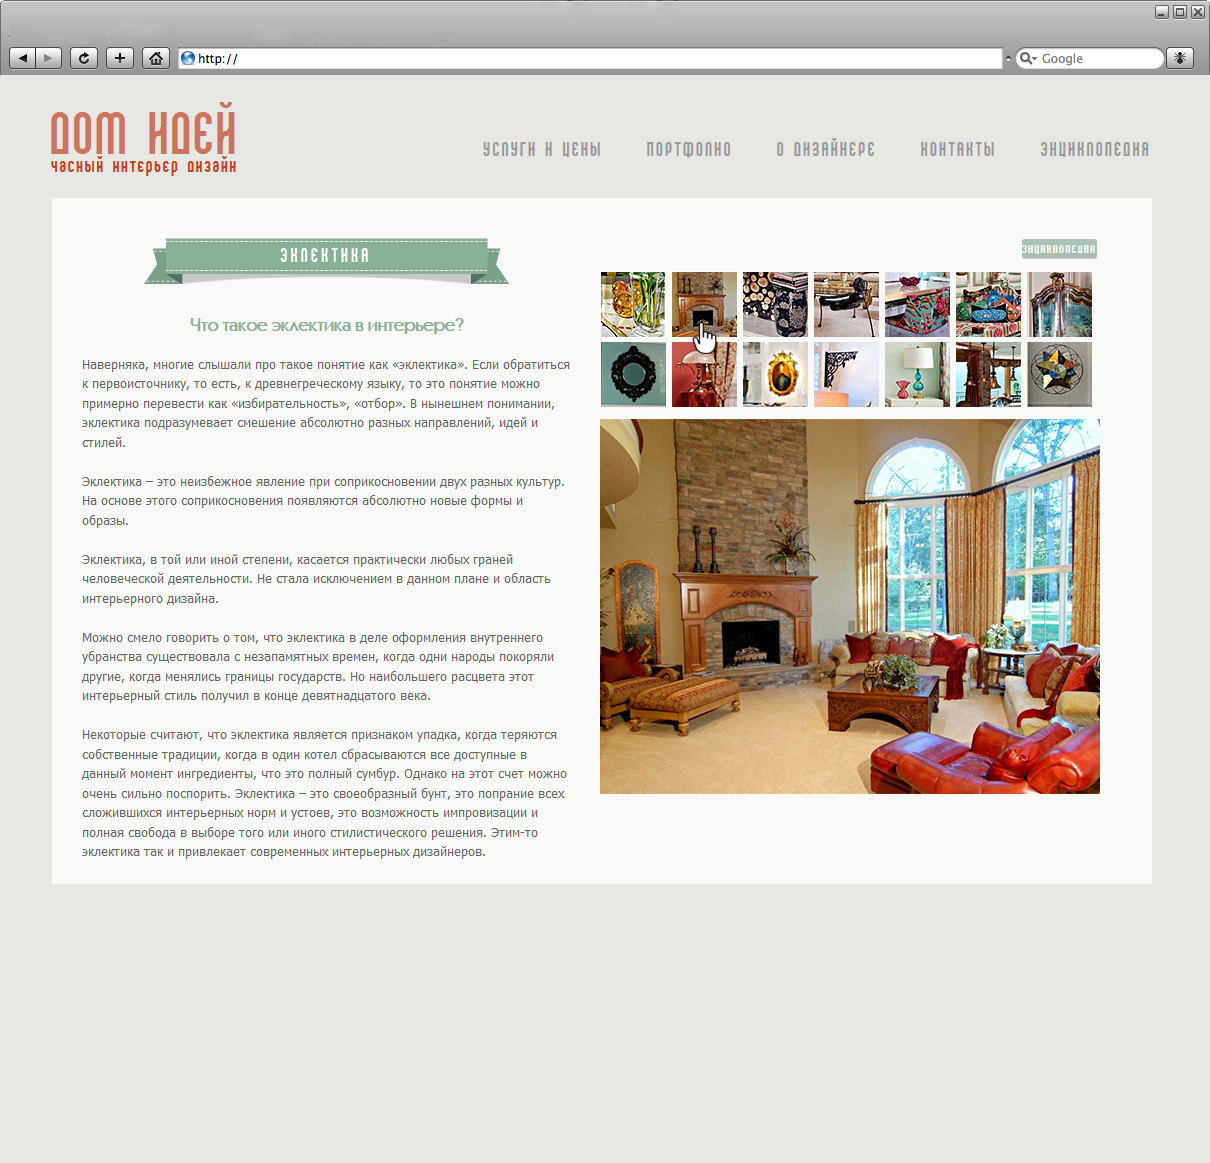 web design, encyclopedia example: eclectic style